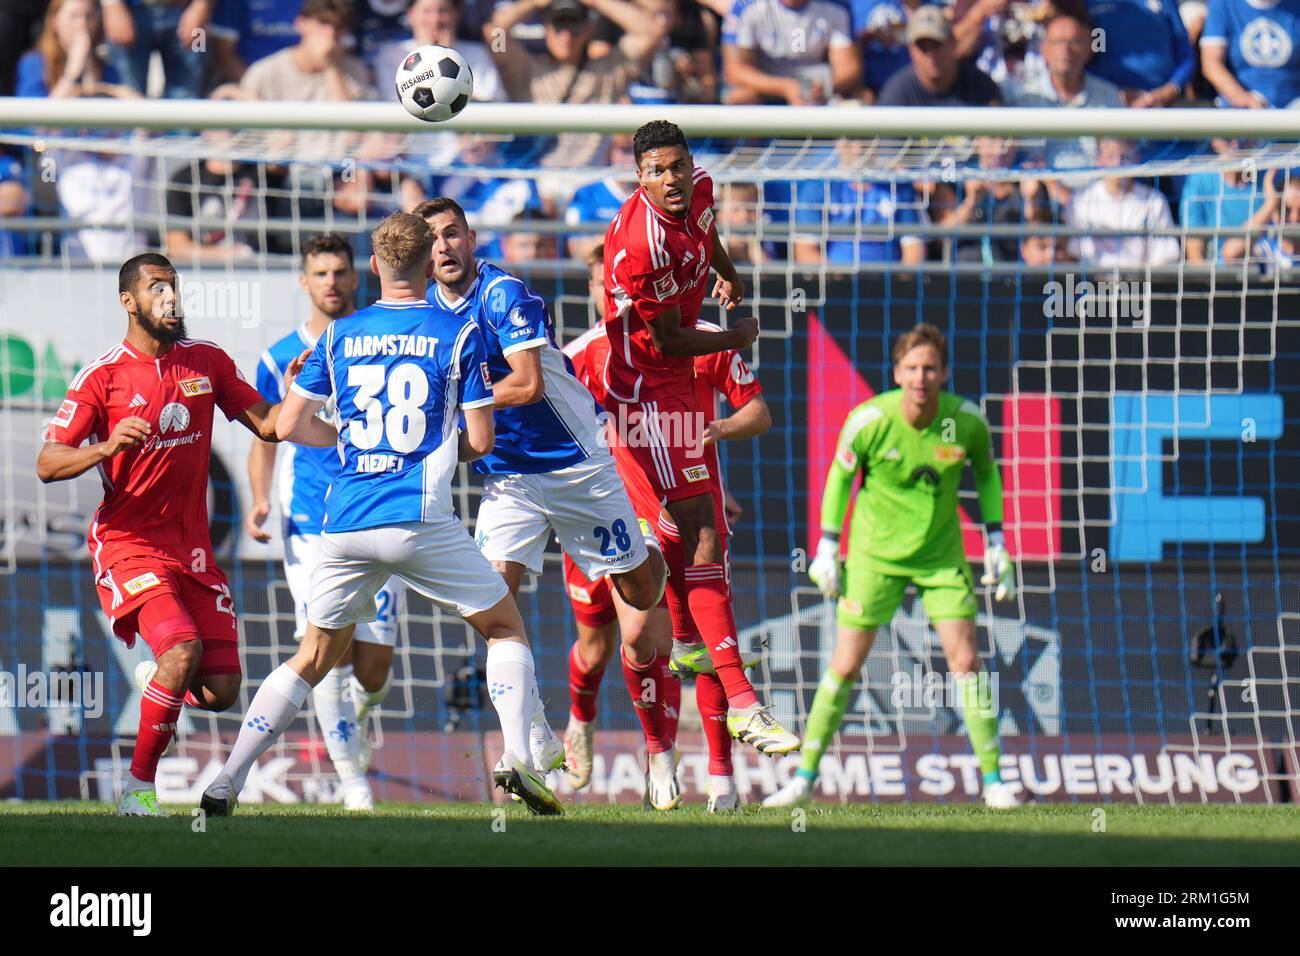 Darmstadt, Germany. 26th Aug, 2023. Soccer: Bundesliga, Darmstadt 98 - 1. FC Union Berlin, Matchday 2, Merck-Stadion am Böllenfalltor. Darmstadt's Bartol Franjic (l) and Darmstadt's Clemens Riedel play on goal. Credit: Thomas Frey/dpa - IMPORTANT NOTE: In accordance with the requirements of the DFL Deutsche Fußball Liga and the DFB Deutscher Fußball-Bund, it is prohibited to use or have used photographs taken in the stadium and/or of the match in the form of sequence pictures and/or video-like photo series./dpa/Alamy Live News Stock Photo